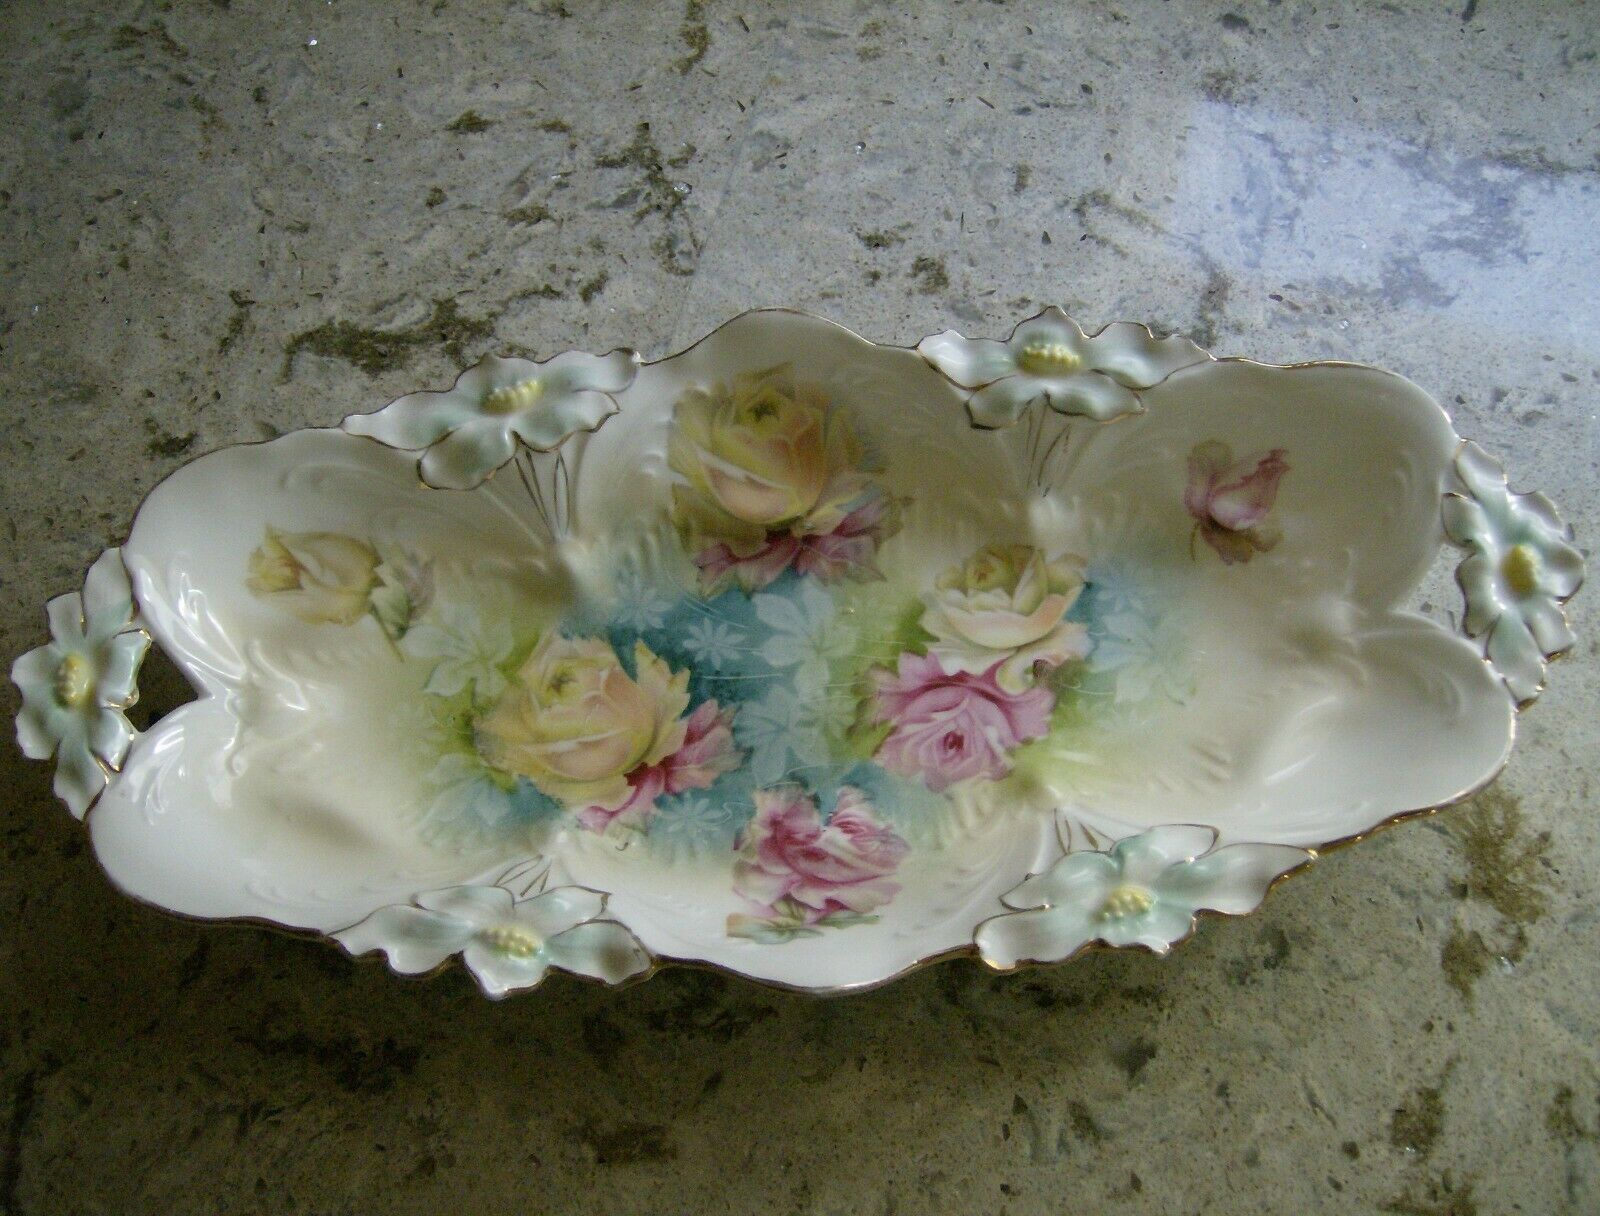 Antique Rs Prussia Porcelain Rose & Poppy Celery Dish - Unmarked